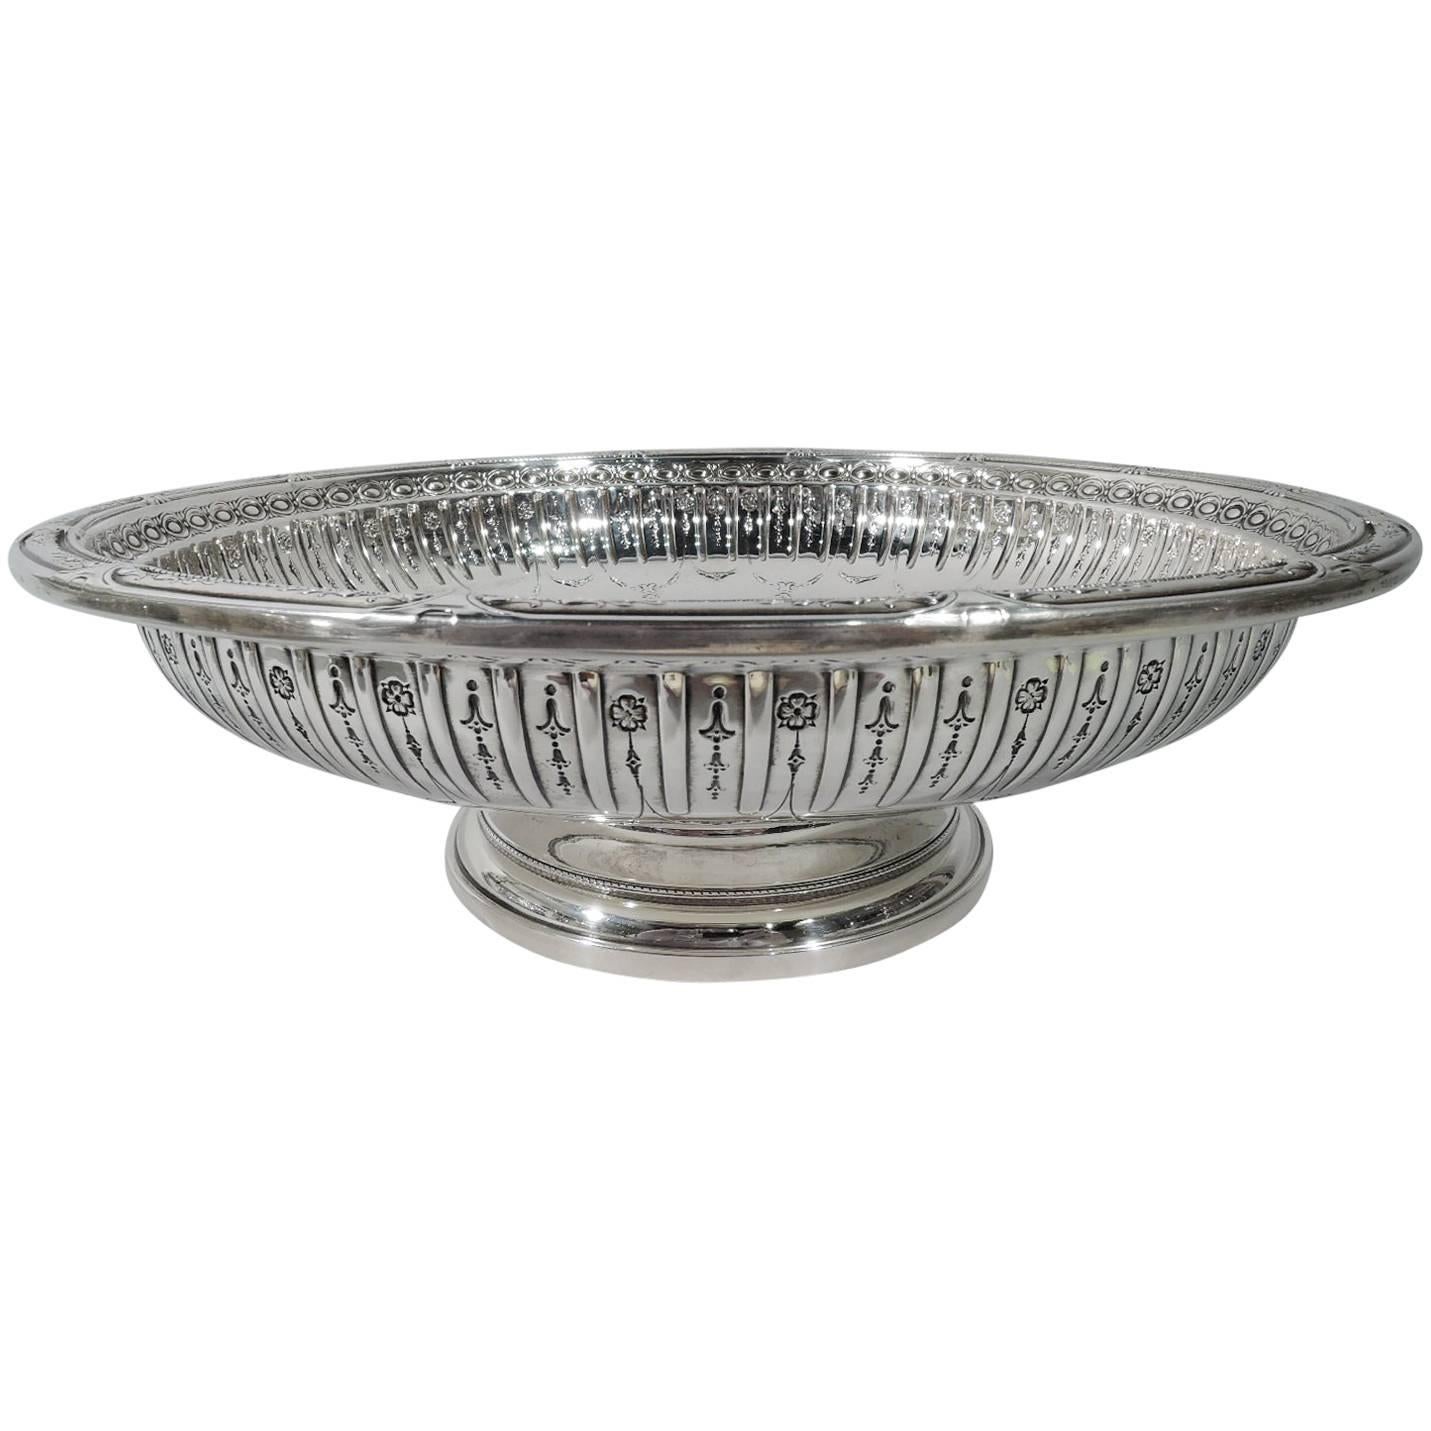 Gorham Sterling Silver Footed Bowl in Marie Antoinette Pattern